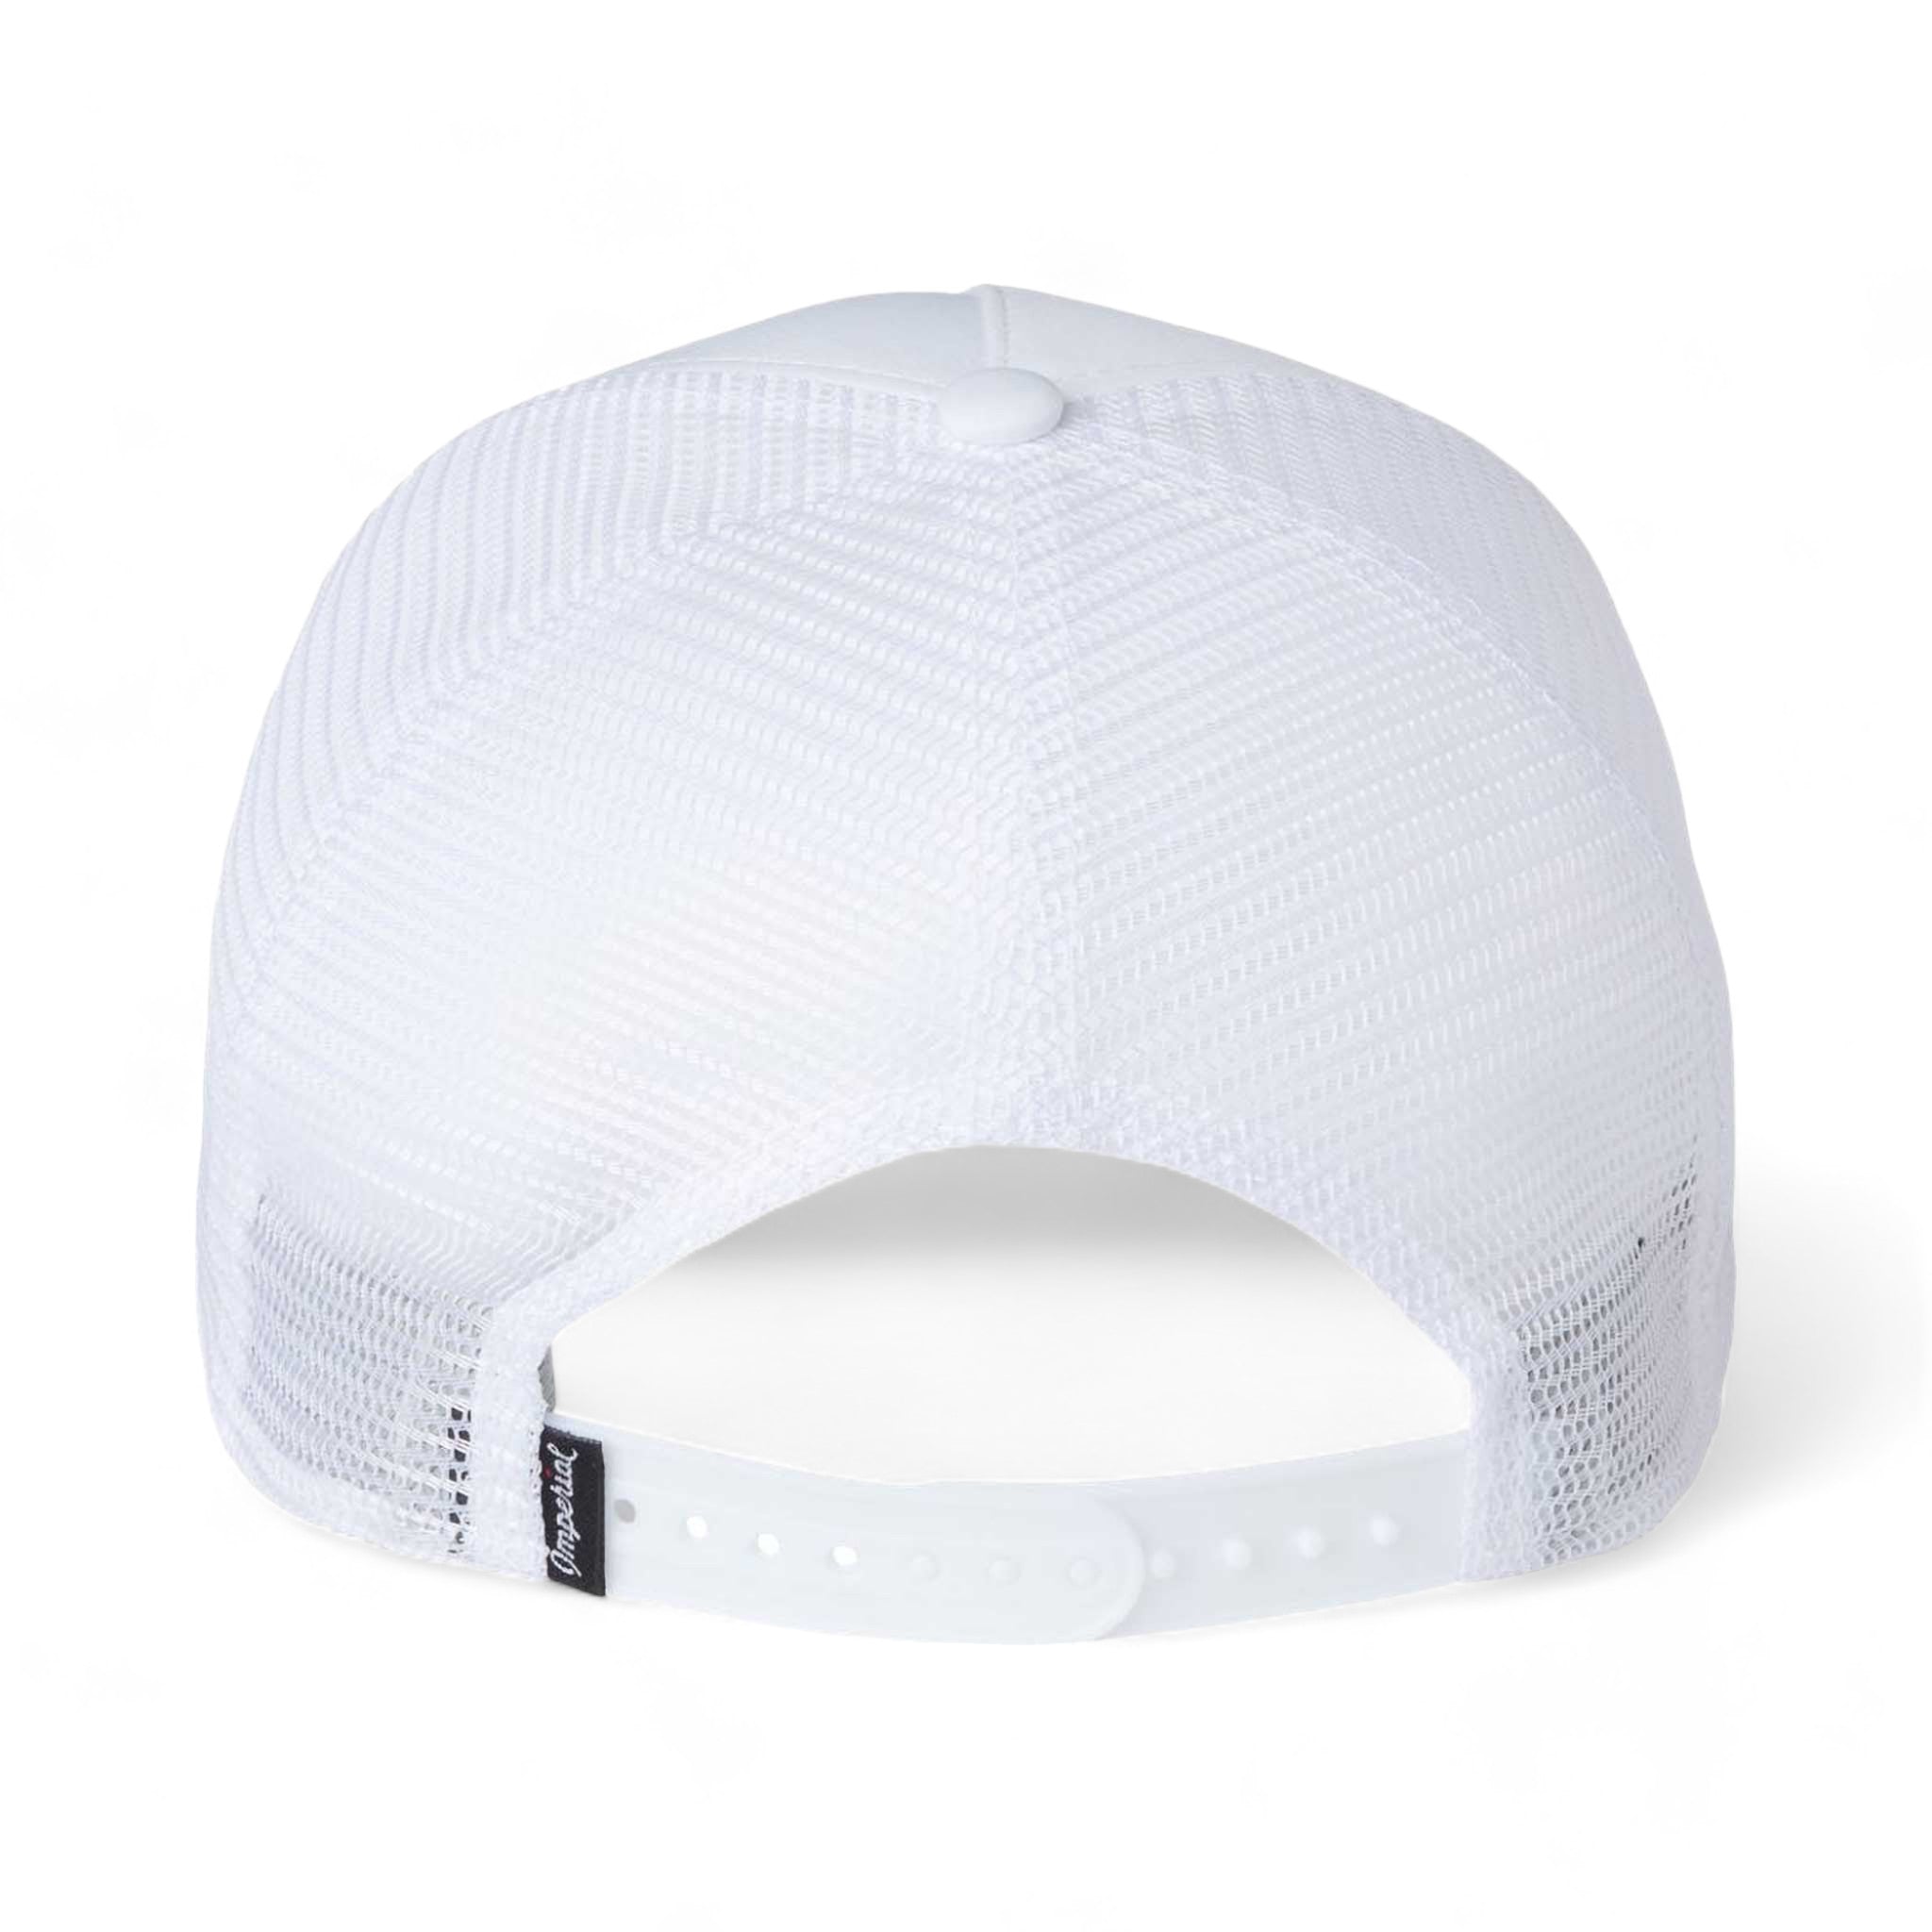 Back view of Imperial 5055 custom hat in white, white and navy